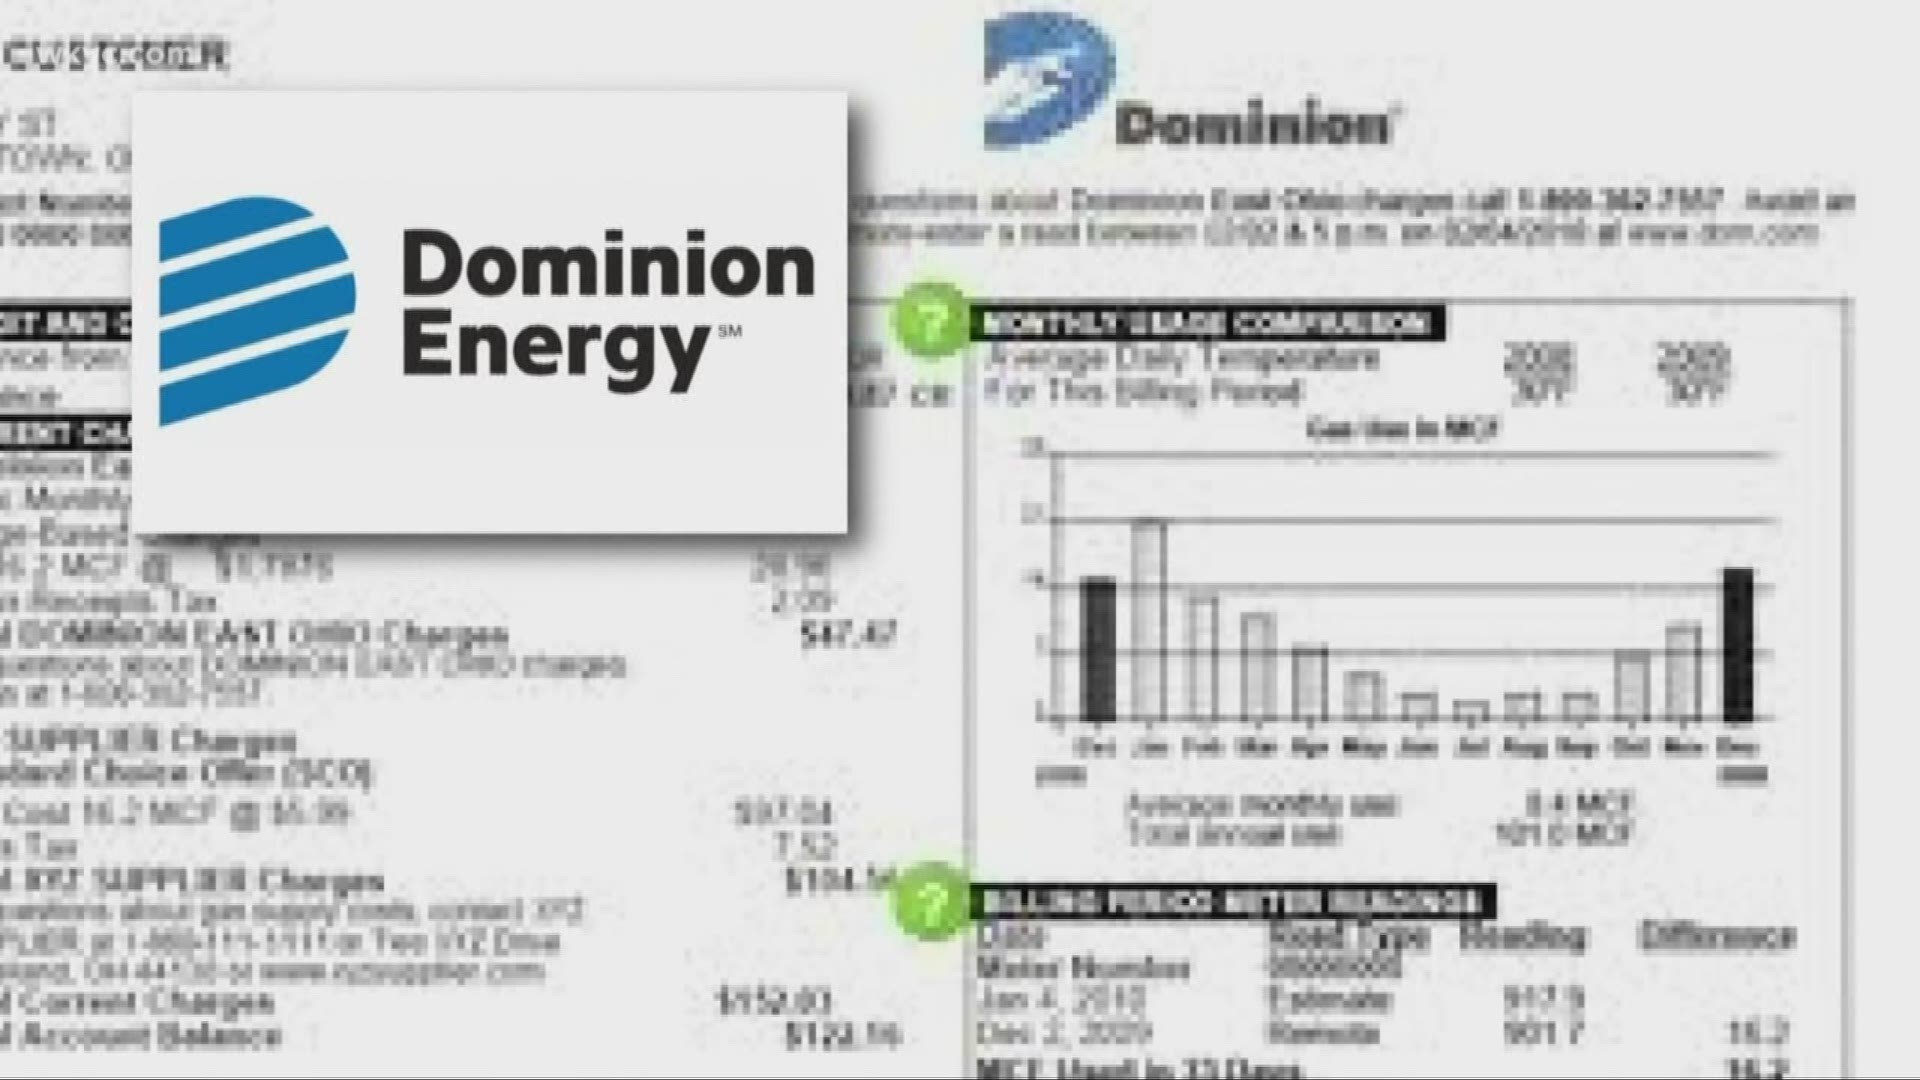 The Public Utilities Commission of Ohio (PUCO) has announced that Dominion will be crediting customers for millions of dollars it over-collected.